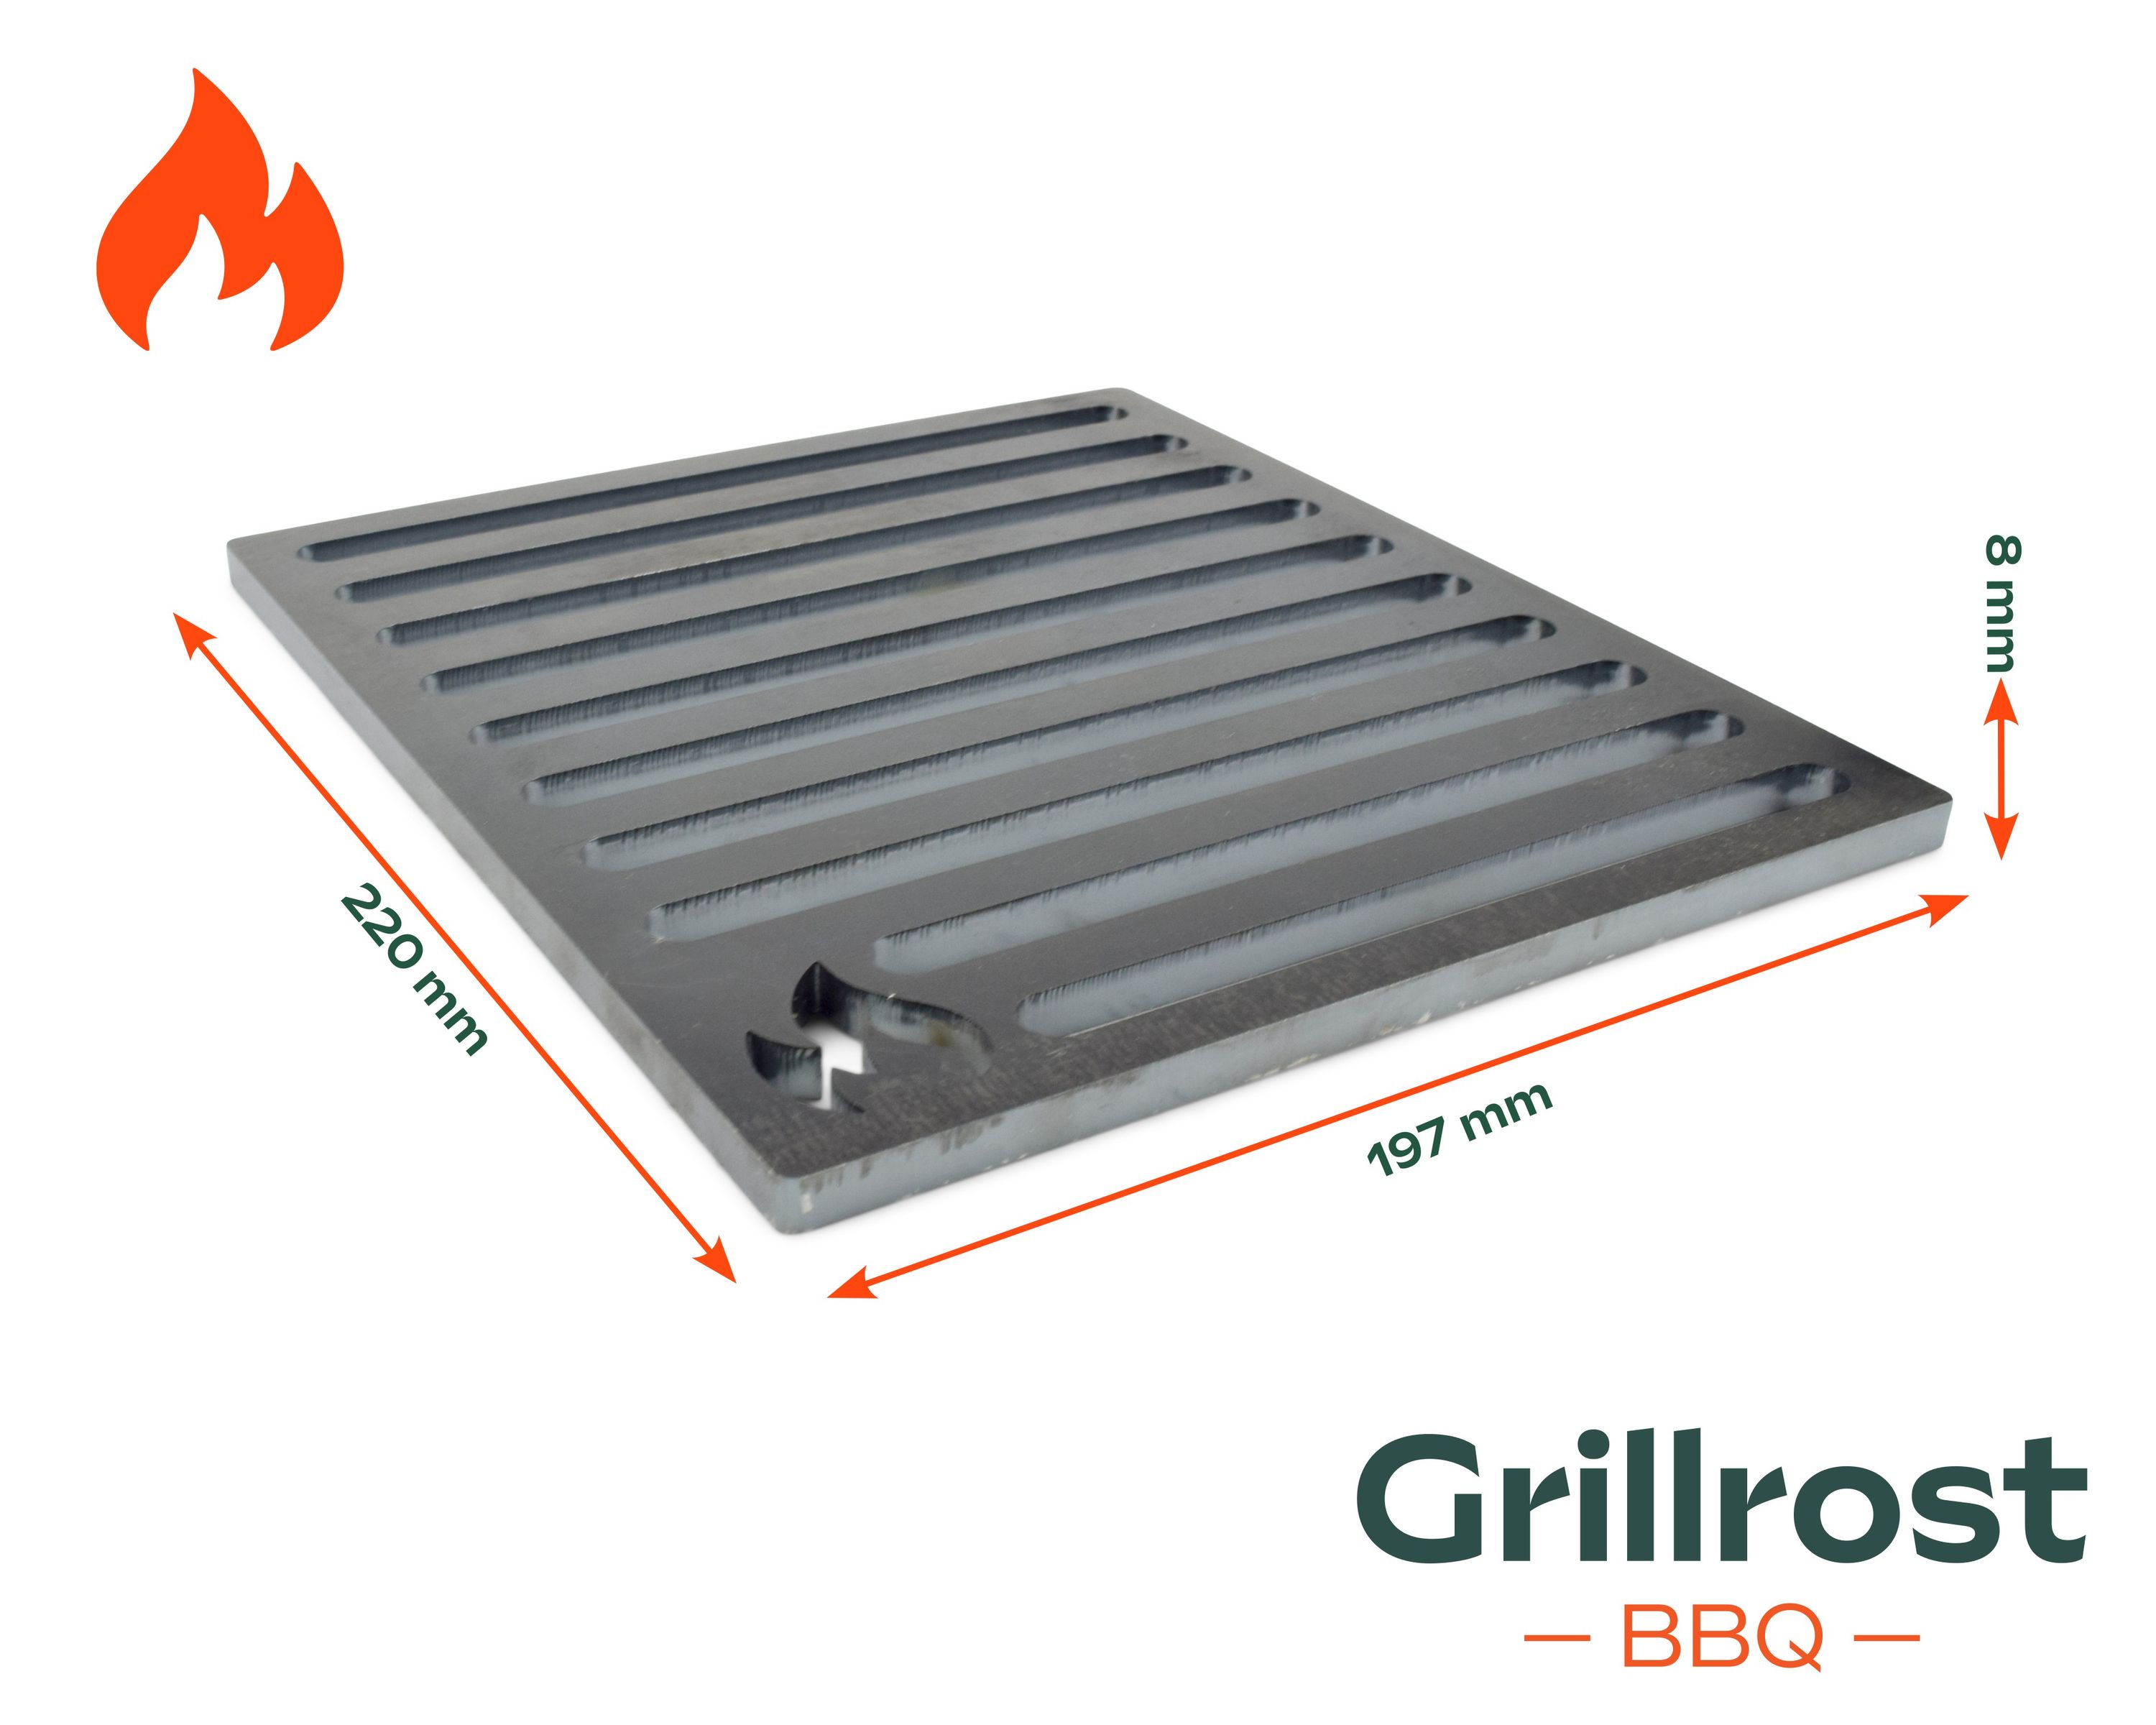 Solid steel oven grate more durable than cast iron grates - for stoves and fireplaces